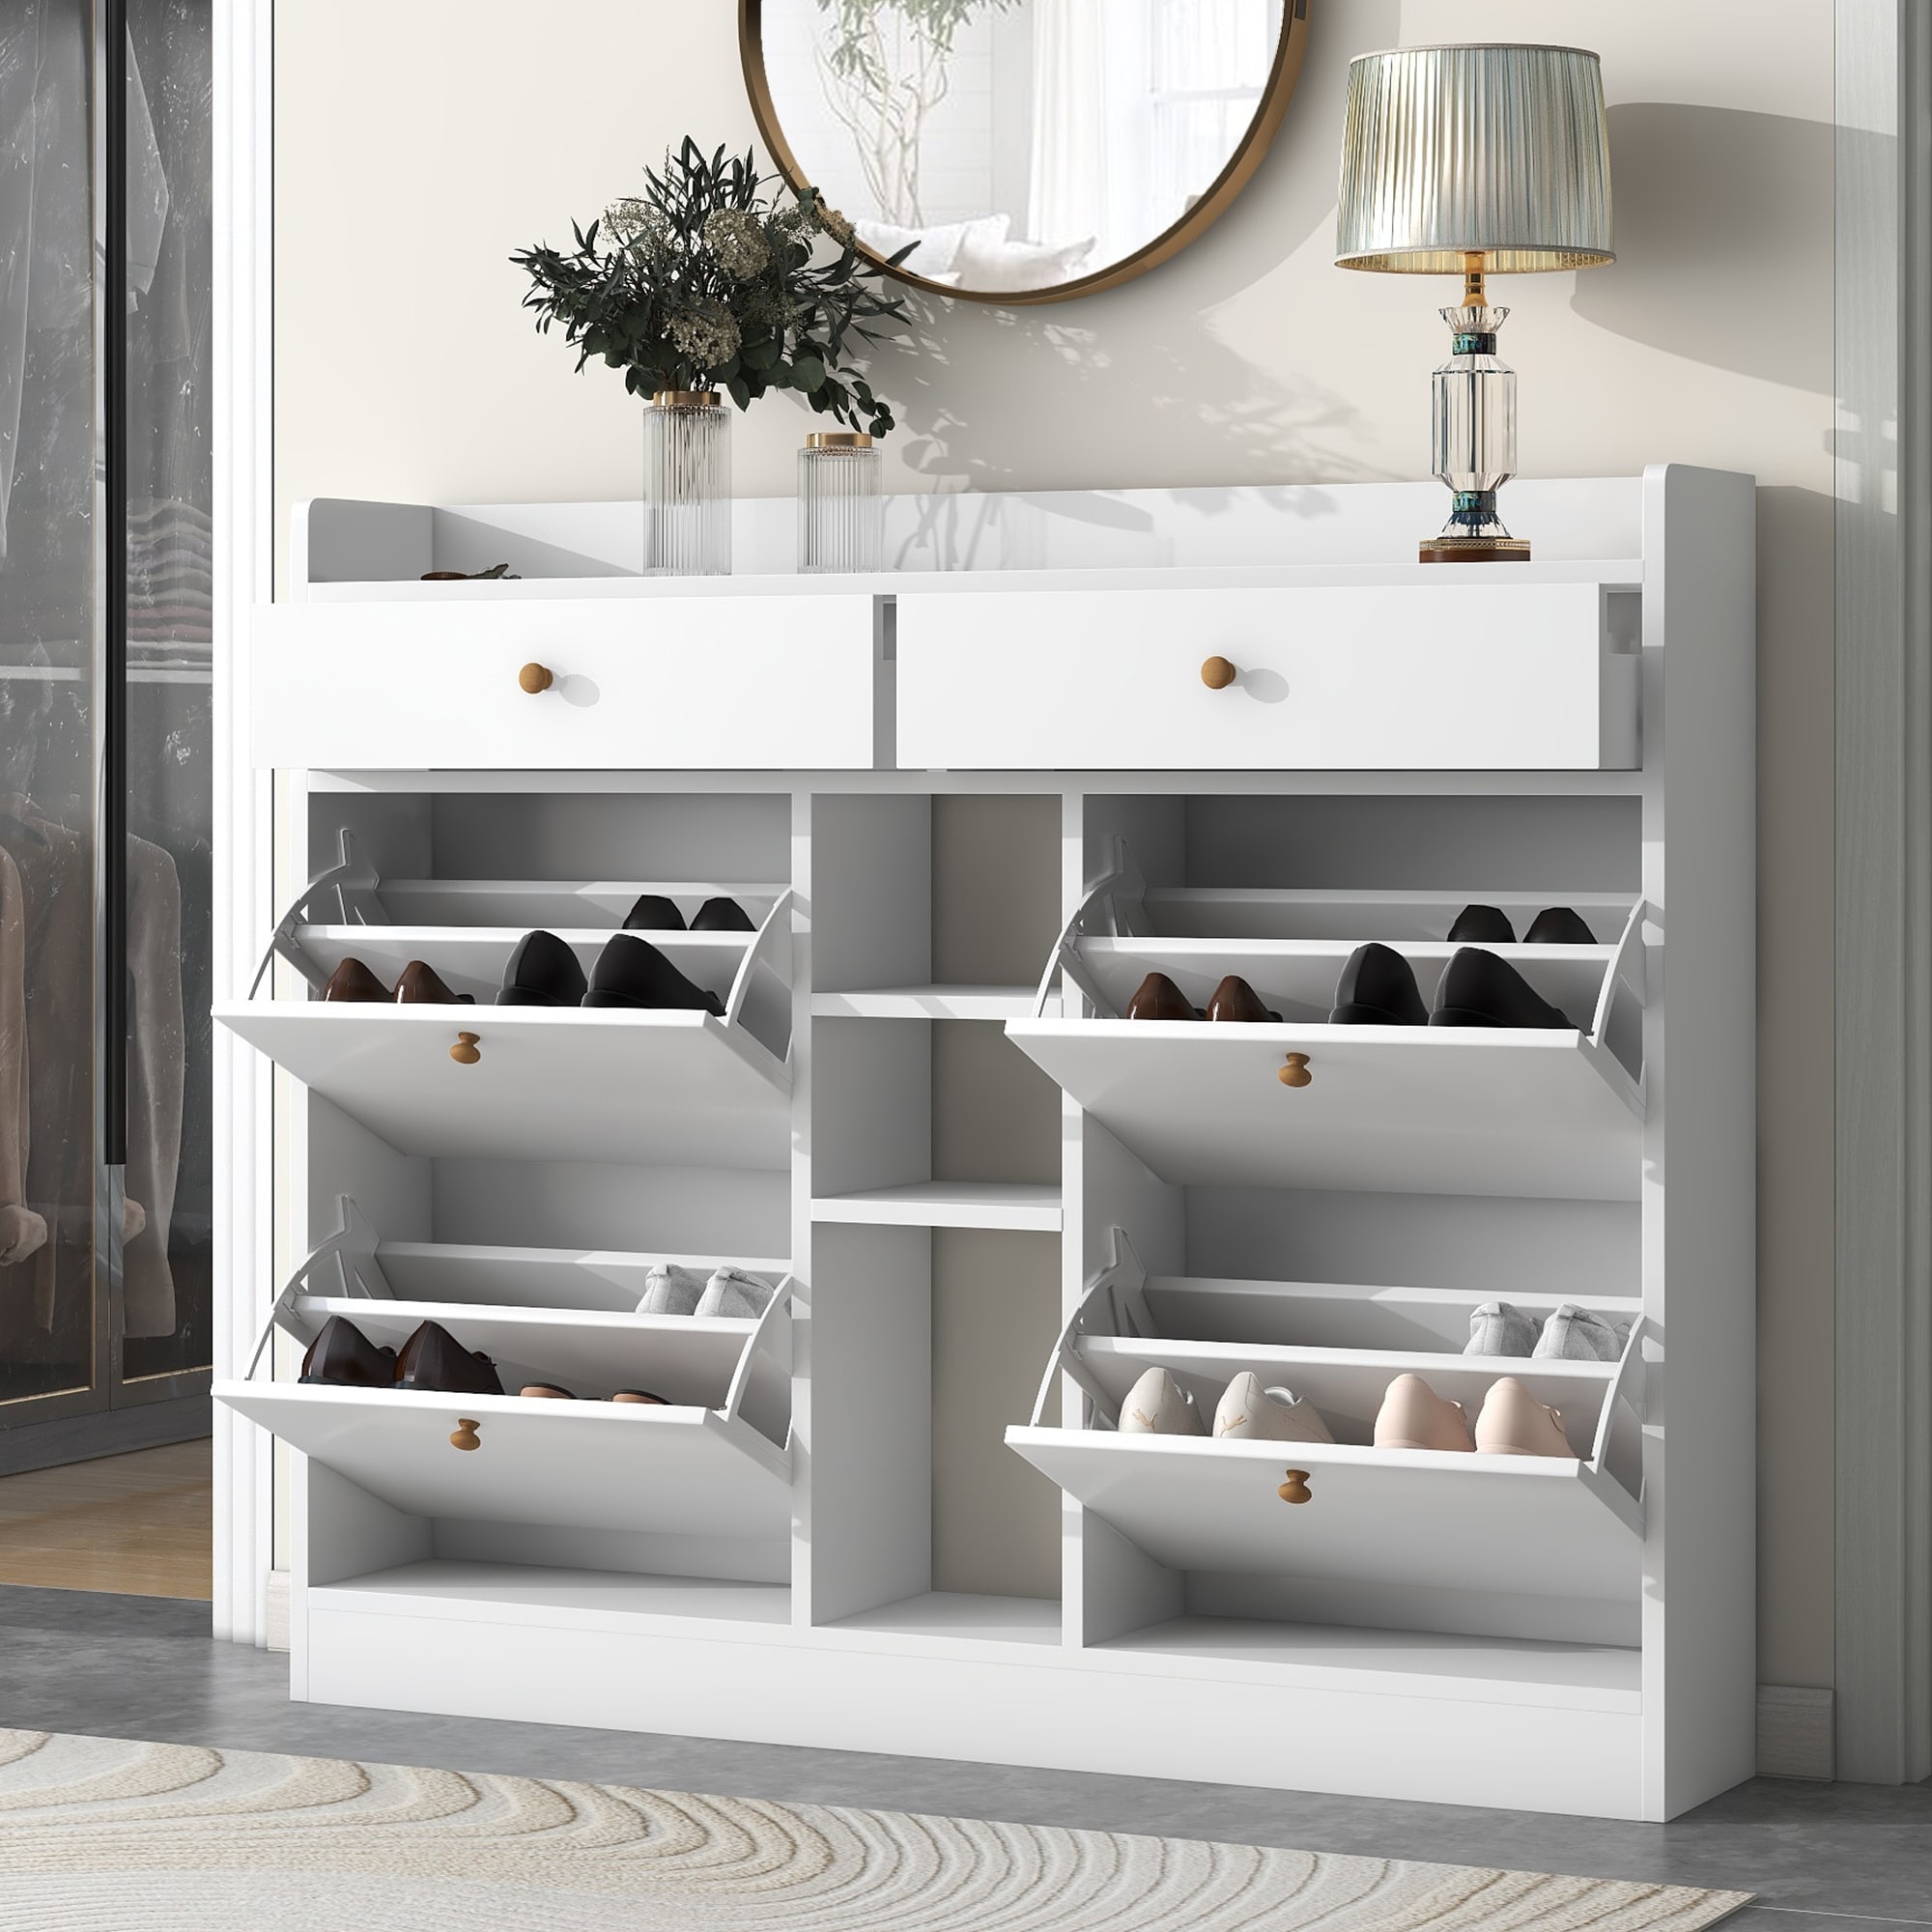 https://ak1.ostkcdn.com/images/products/is/images/direct/8b2c62d900b73209cd21c1e34e059ec310612dc9/Contemporary-Shoe-Cabinet-with-4-Flip-Drawers%2C-2-Tier-Shoe-Storage-Organizer-with-Drawers%2C-Free-Standing-Shoe-Rack-for-Hallway.jpg